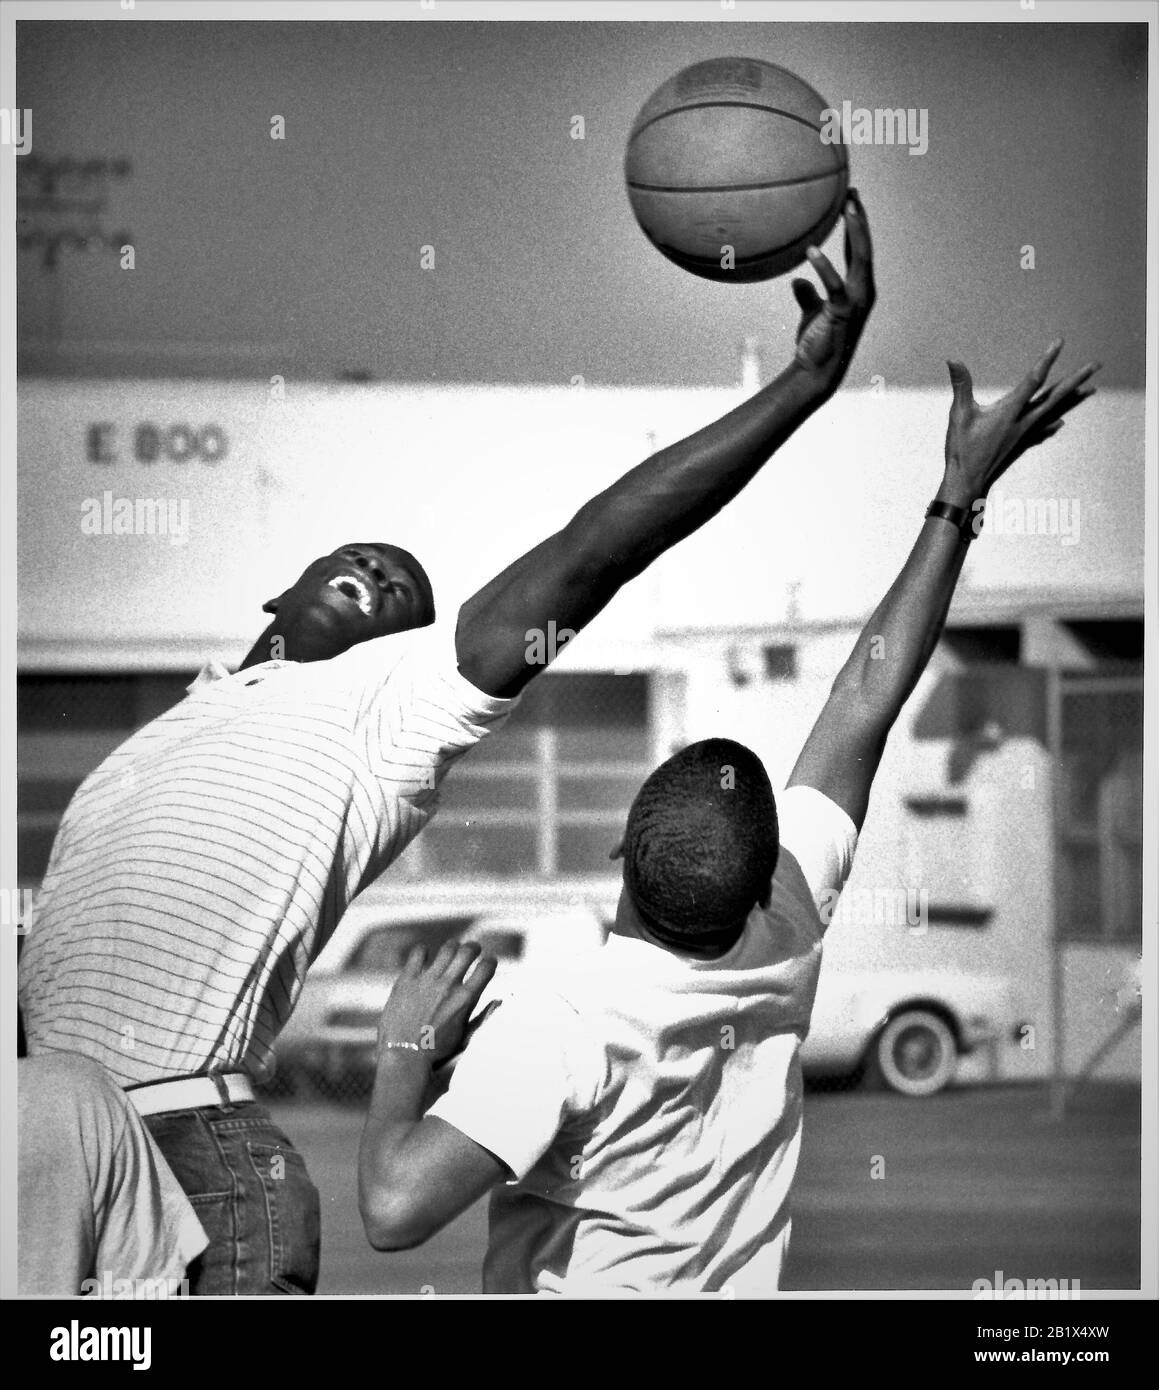 Basketball pickup game in school year with blocking shot and rebounding outside industrial work building at lunch time Stock Photo